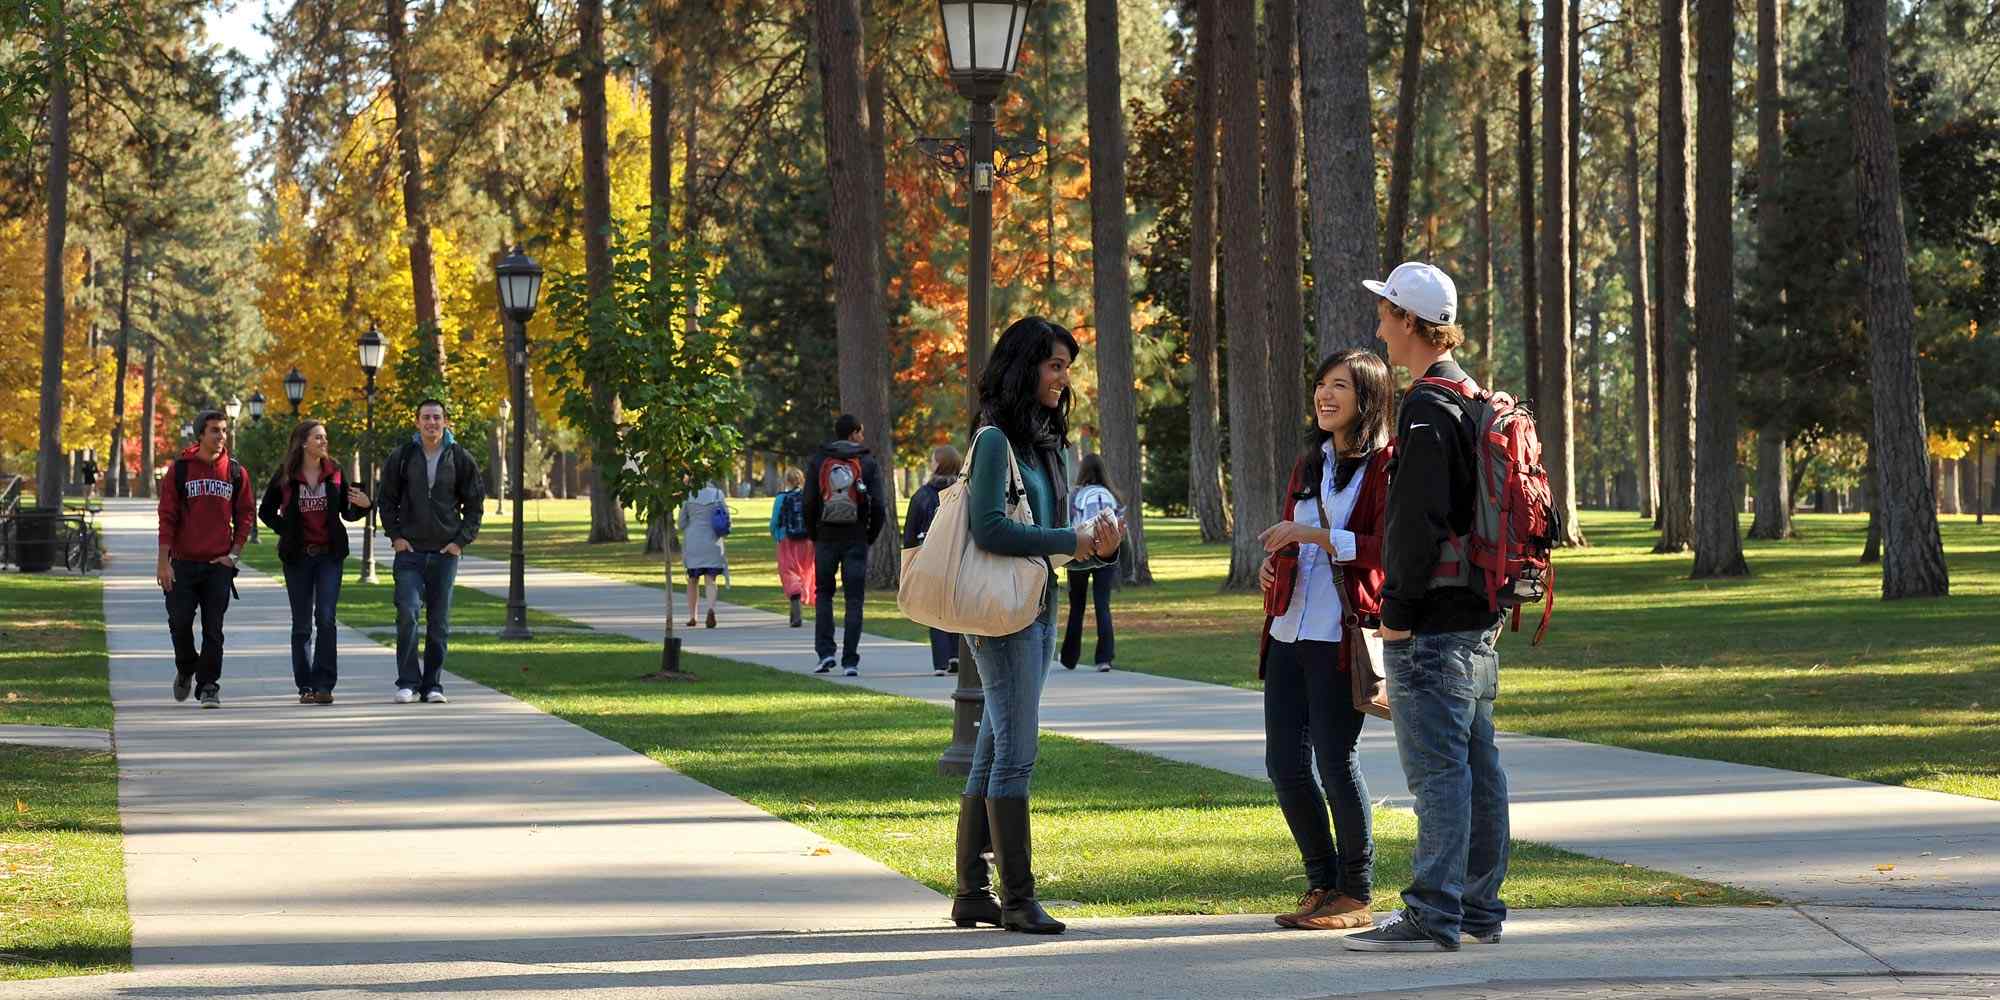 Three students stand together laughing and talking. Behind them students walk through campus with towering pine trees.